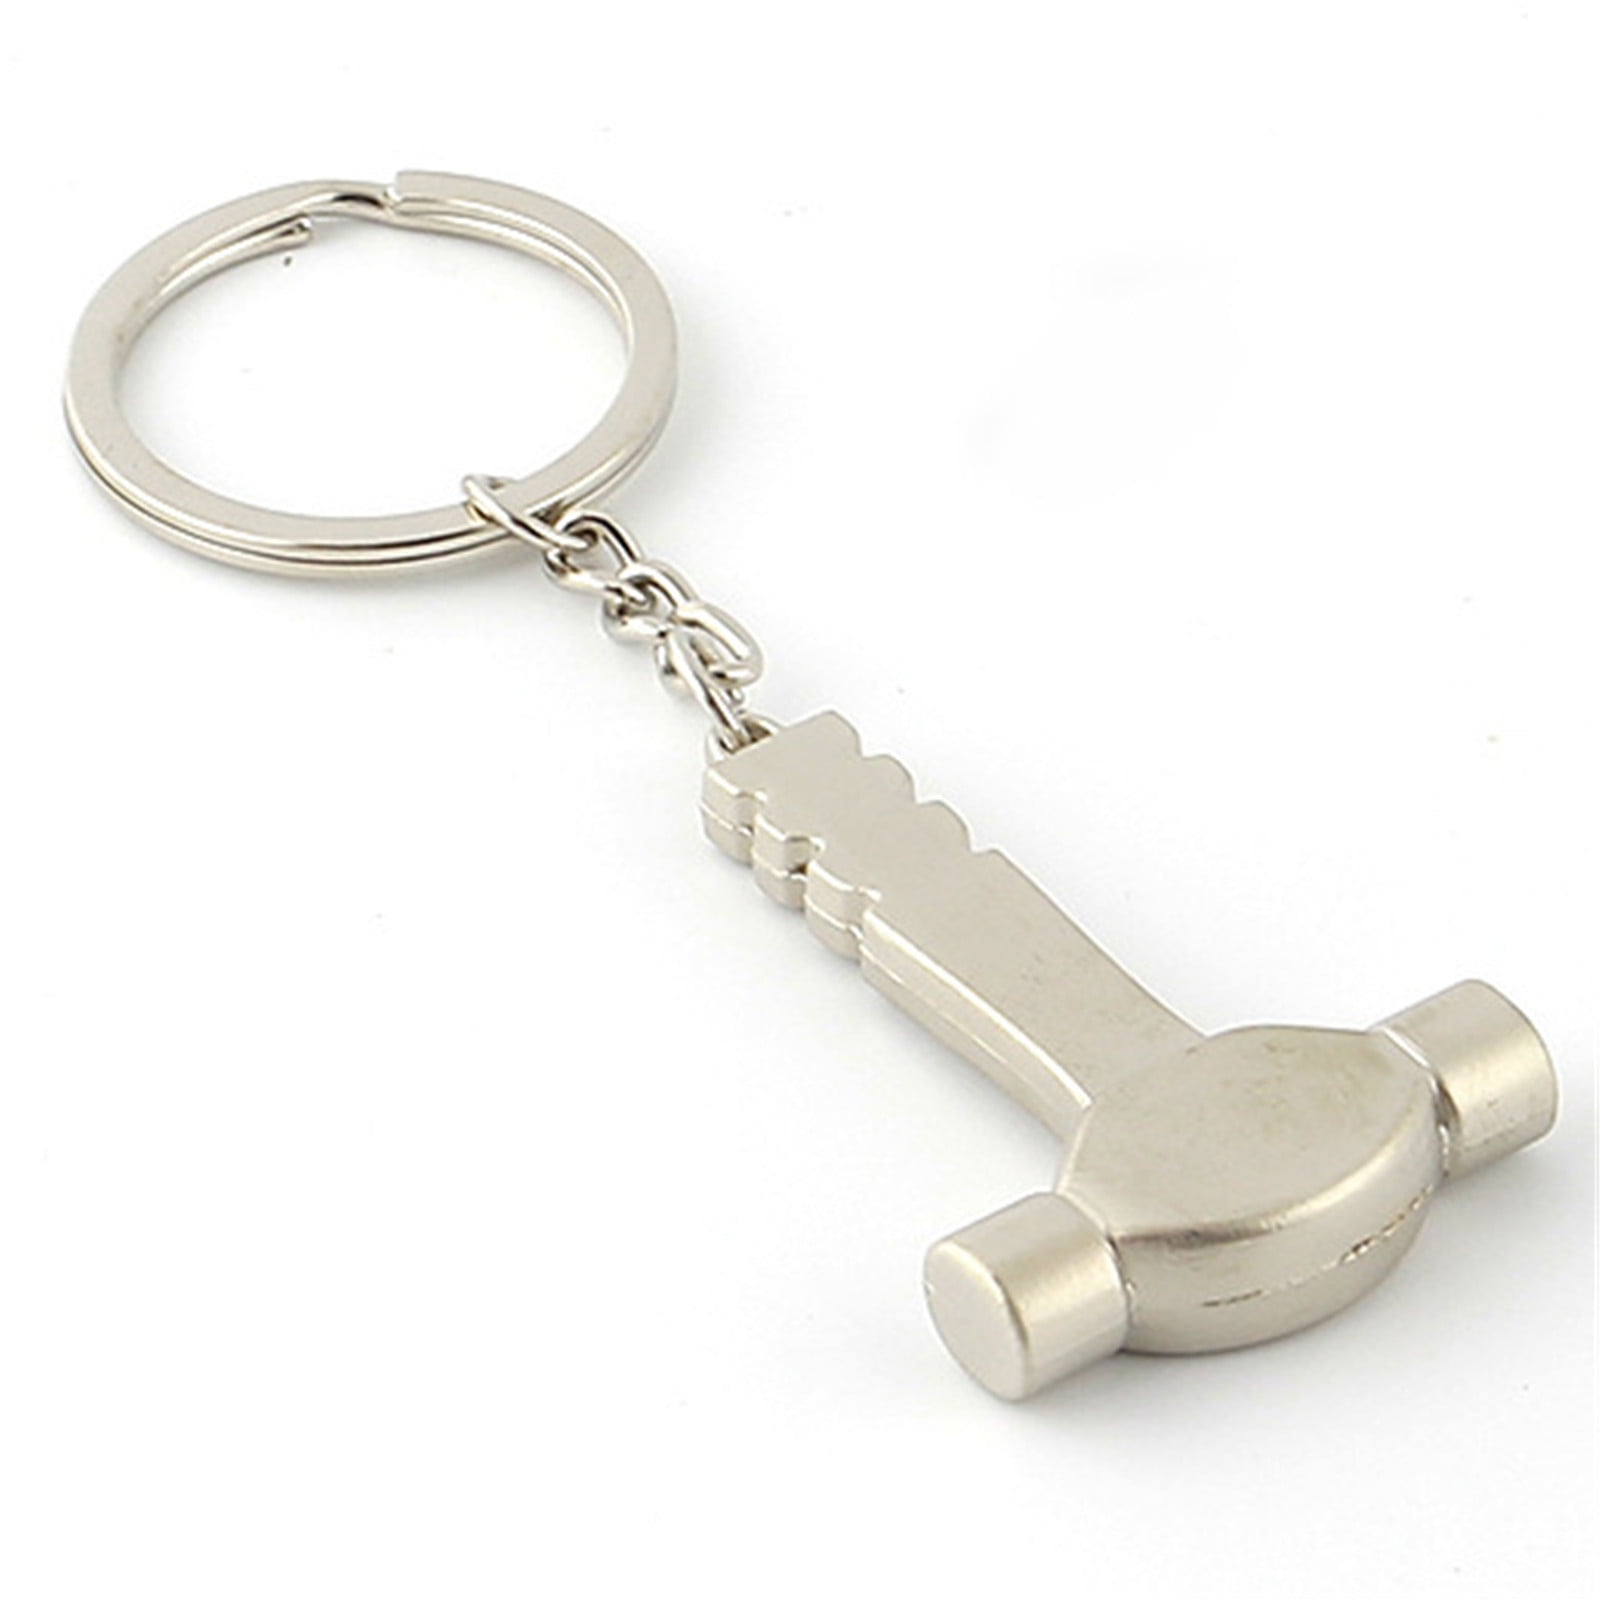 Details about   Creative Metal Adjustable Tool Wrench Spanner Car Keyring Ring Keychain 